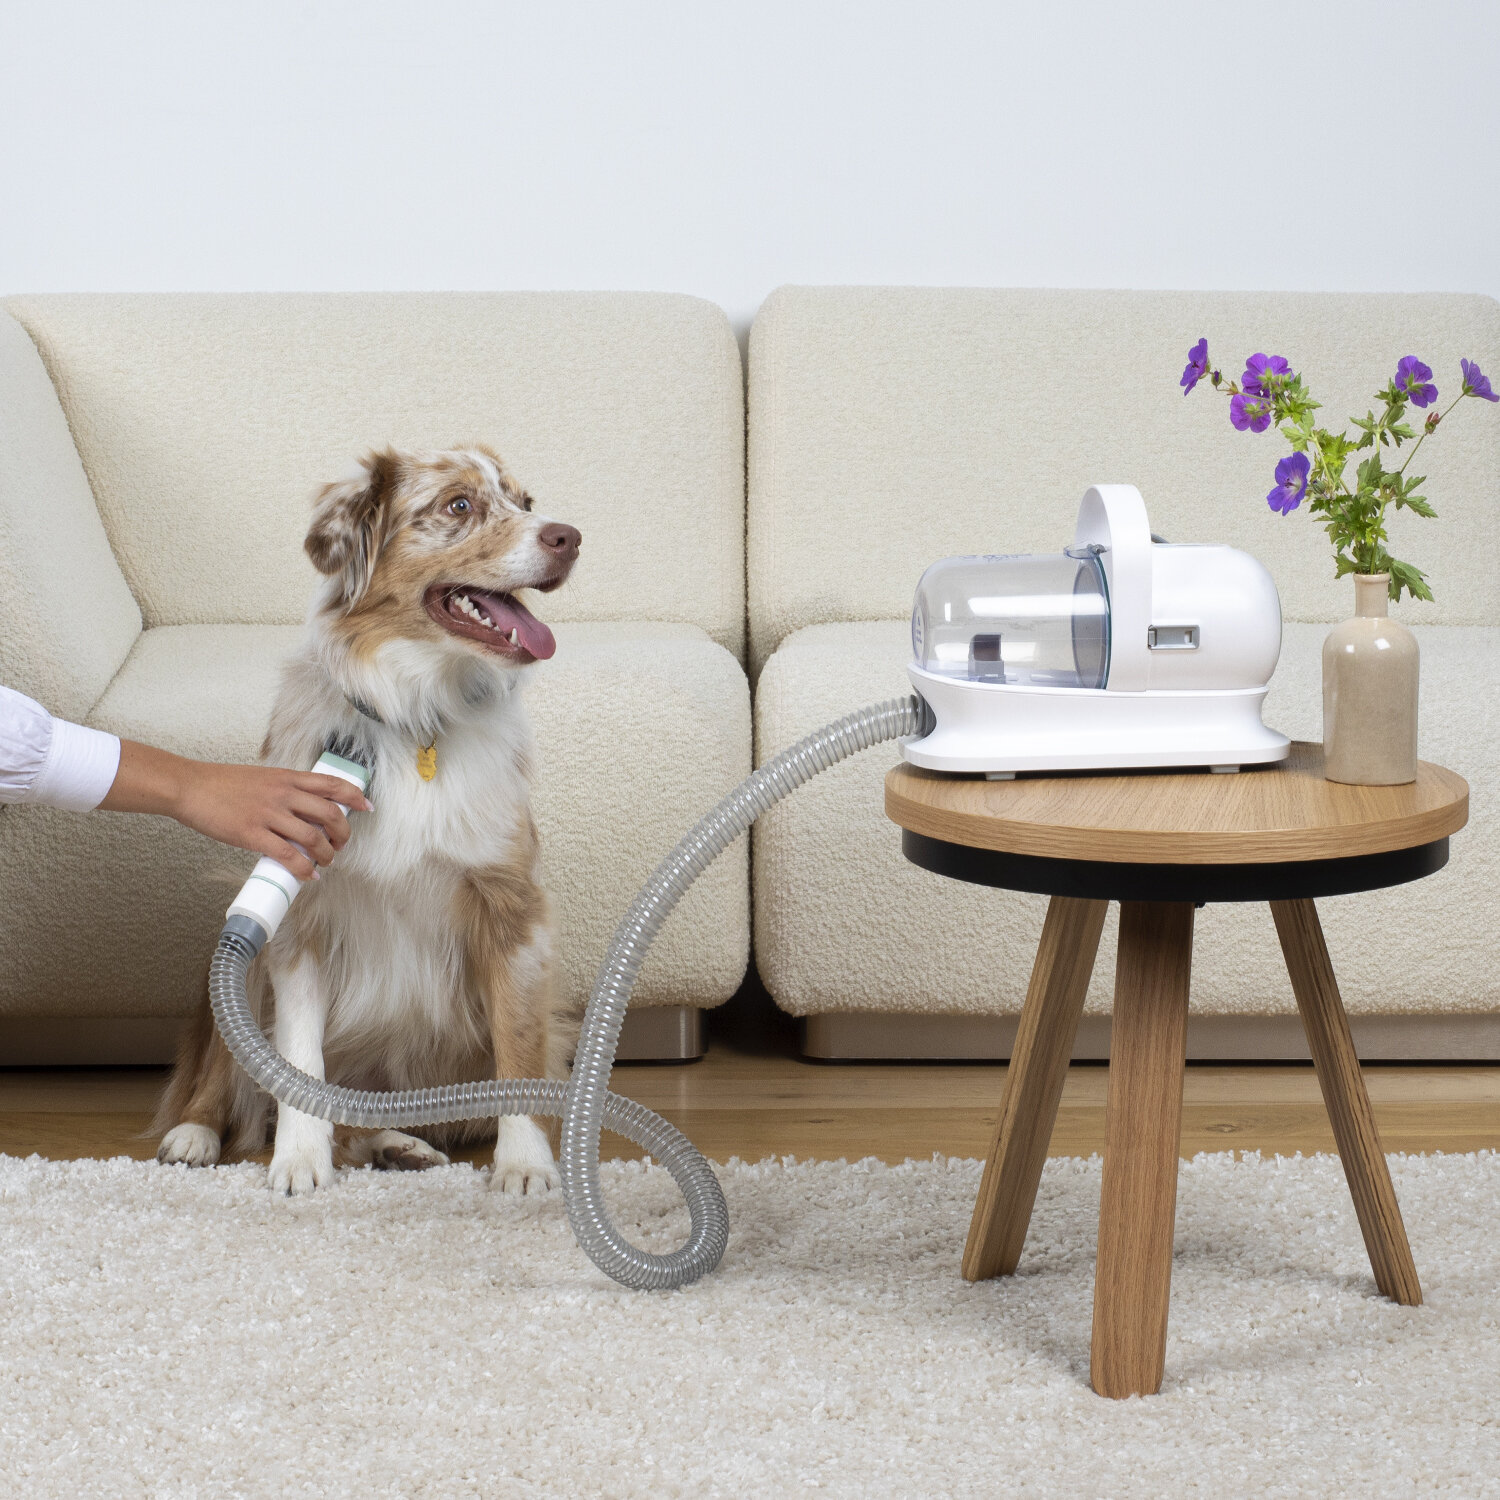 Our products > home > clippers vacuum for pet grooming : Koenig - EN